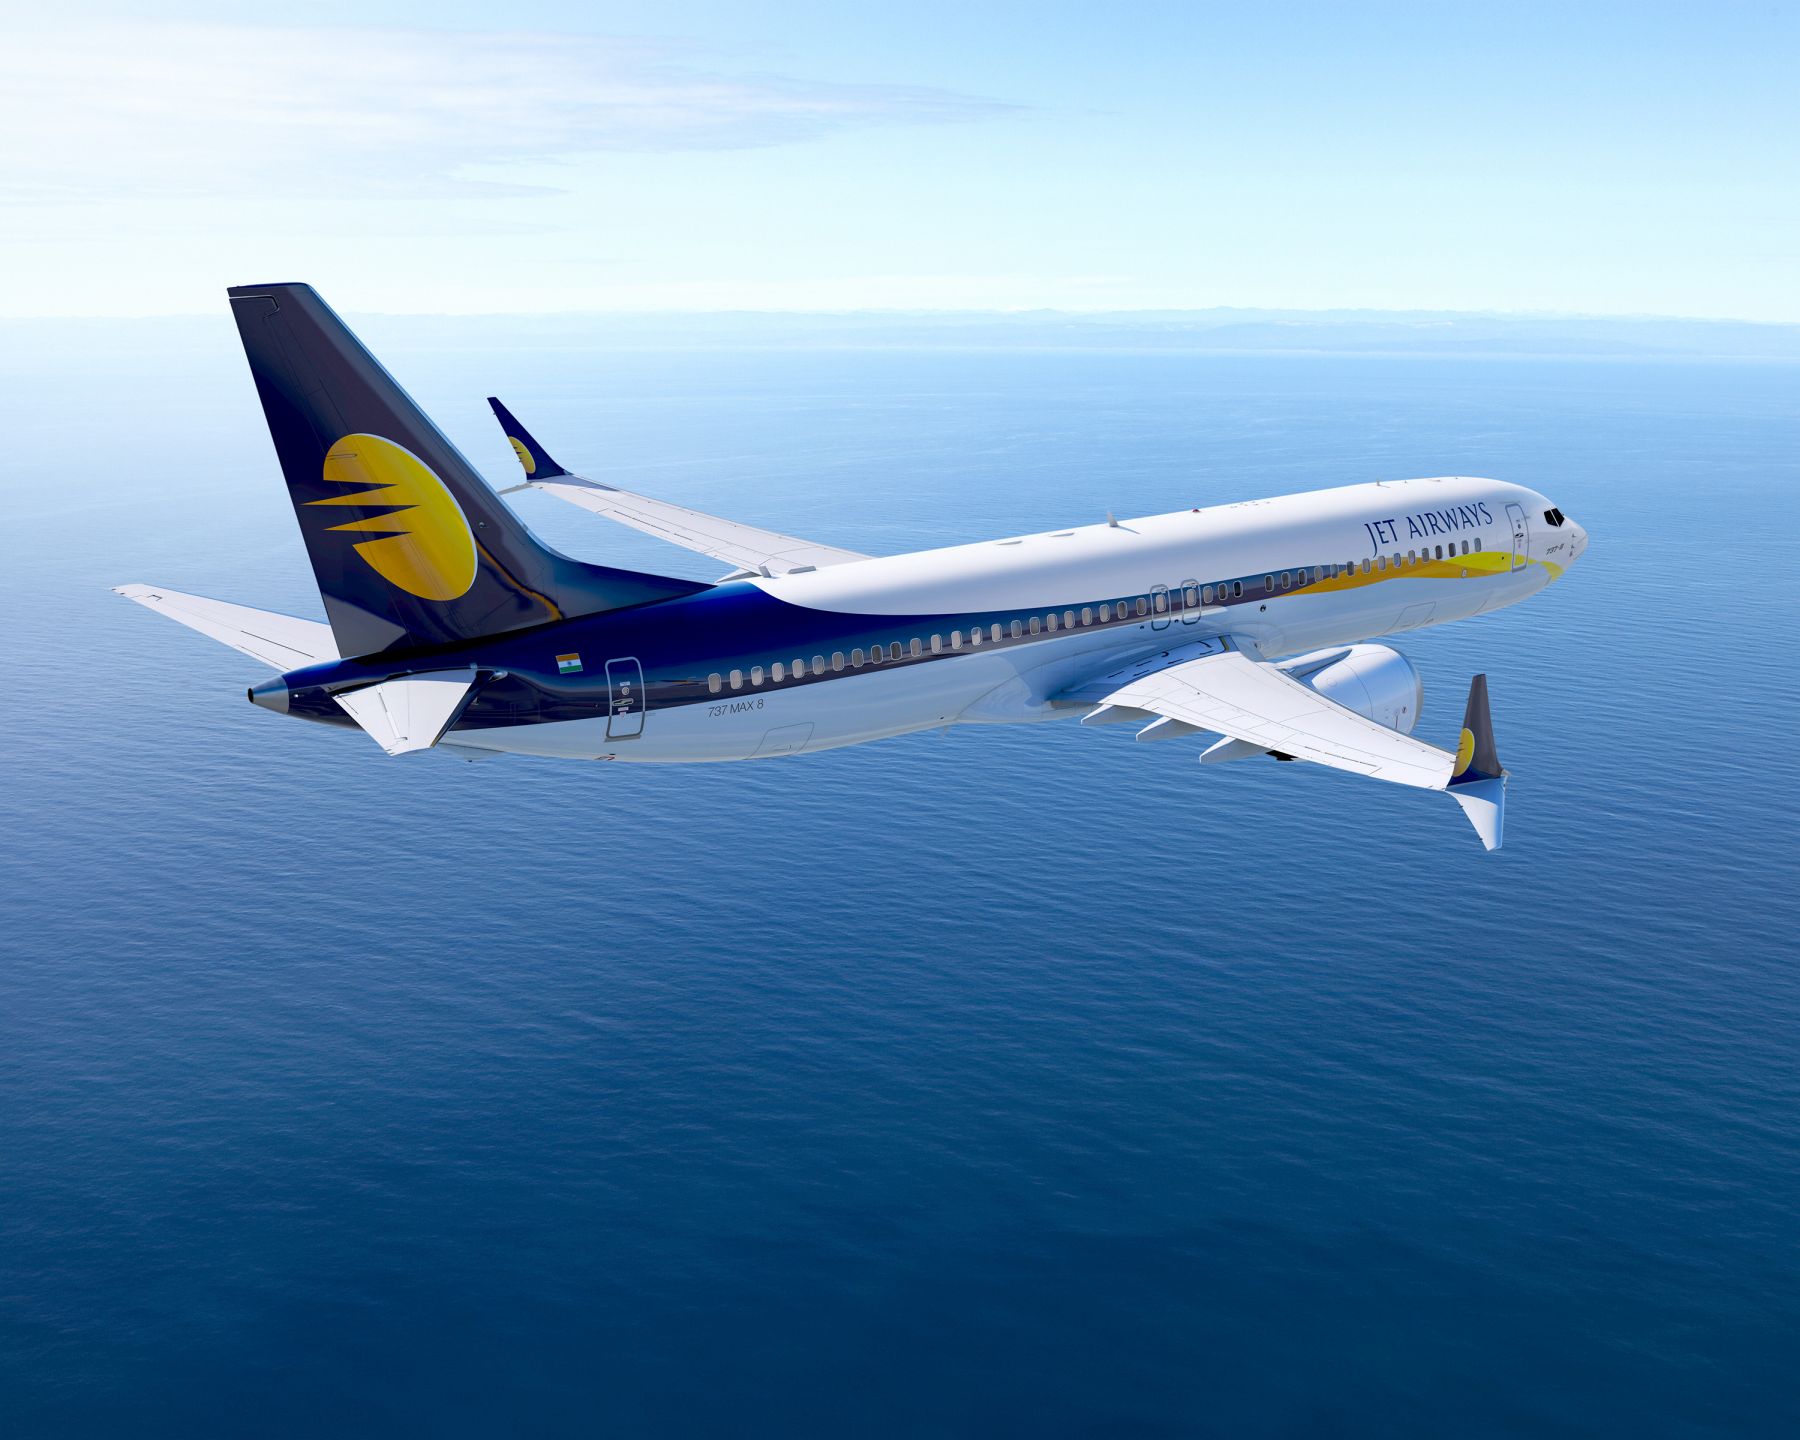 Further resignation takes place at troubled carrier Jet Airways